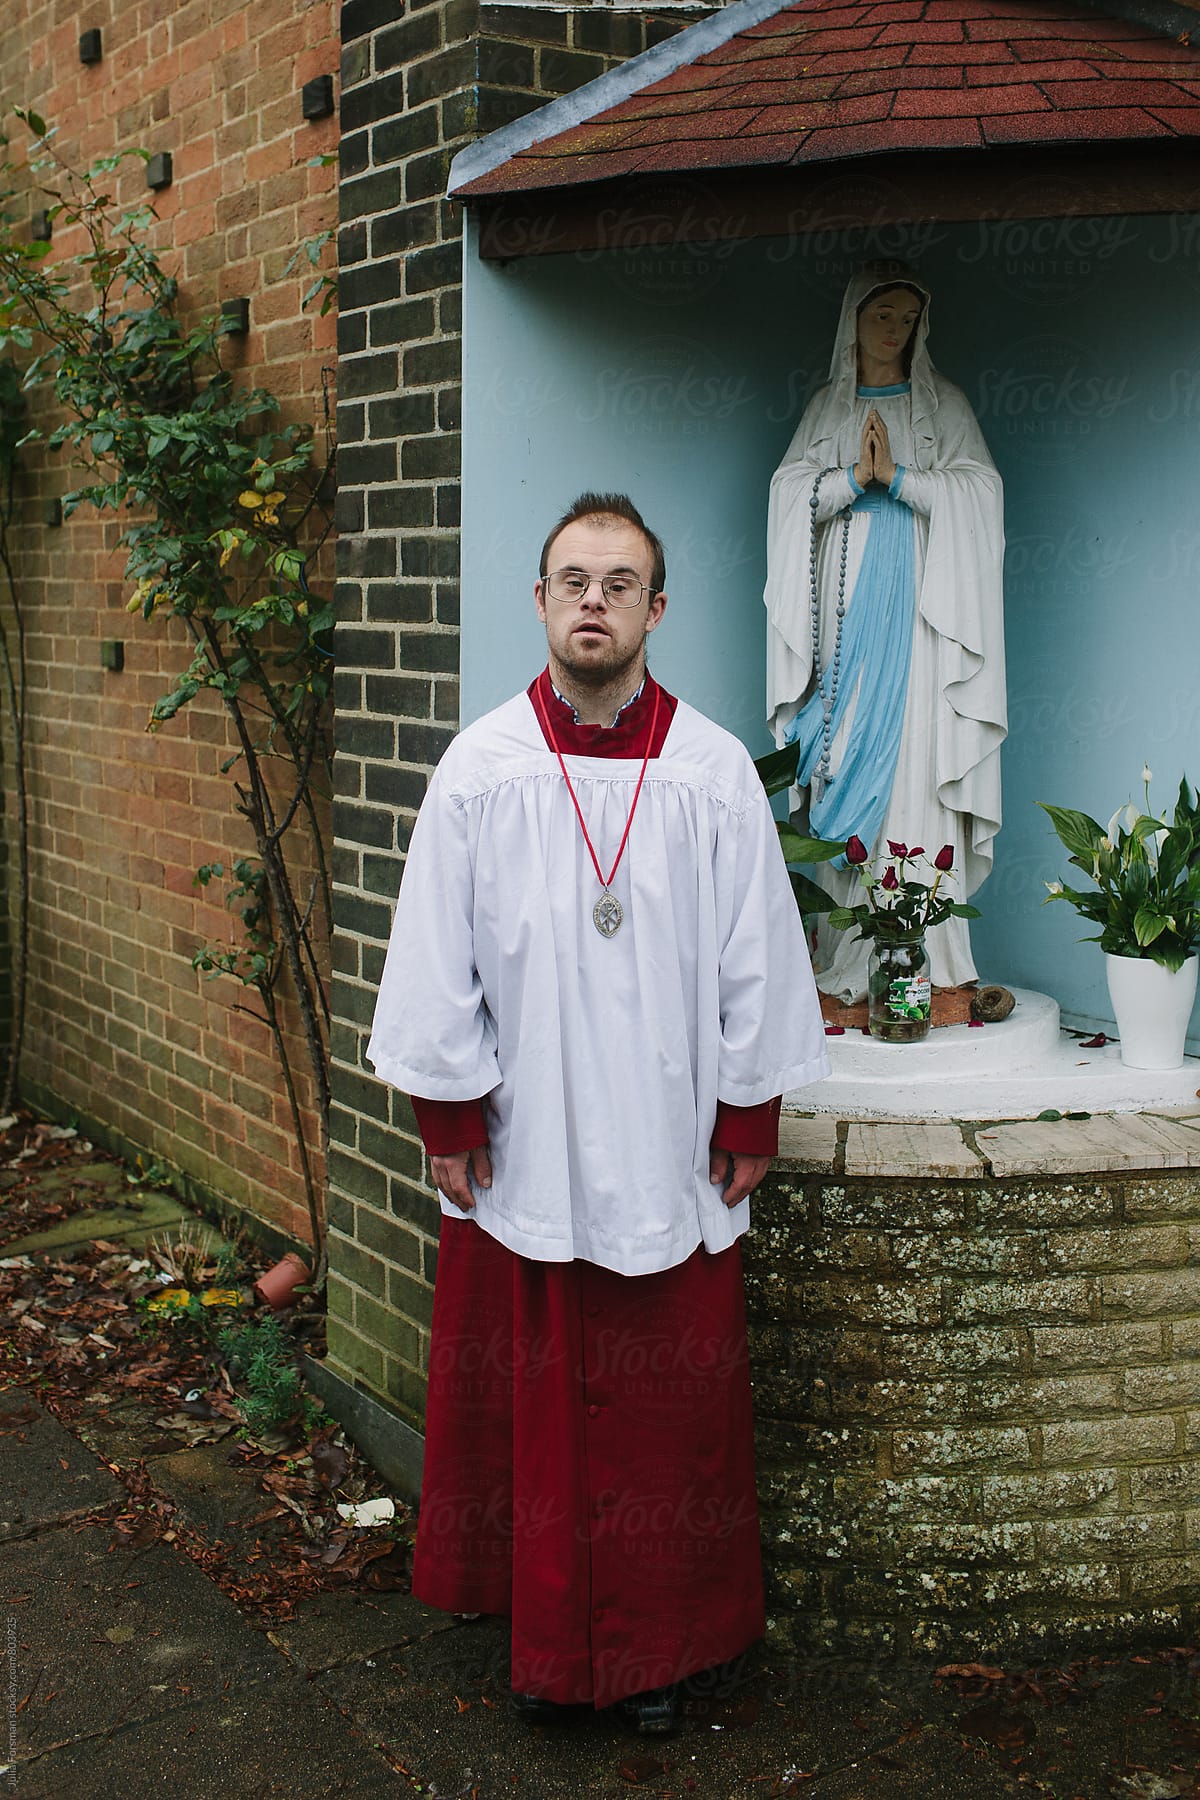 A man with Down's Syndrome wearing altar serving robes poses next to a statue of the Virgin Mary.